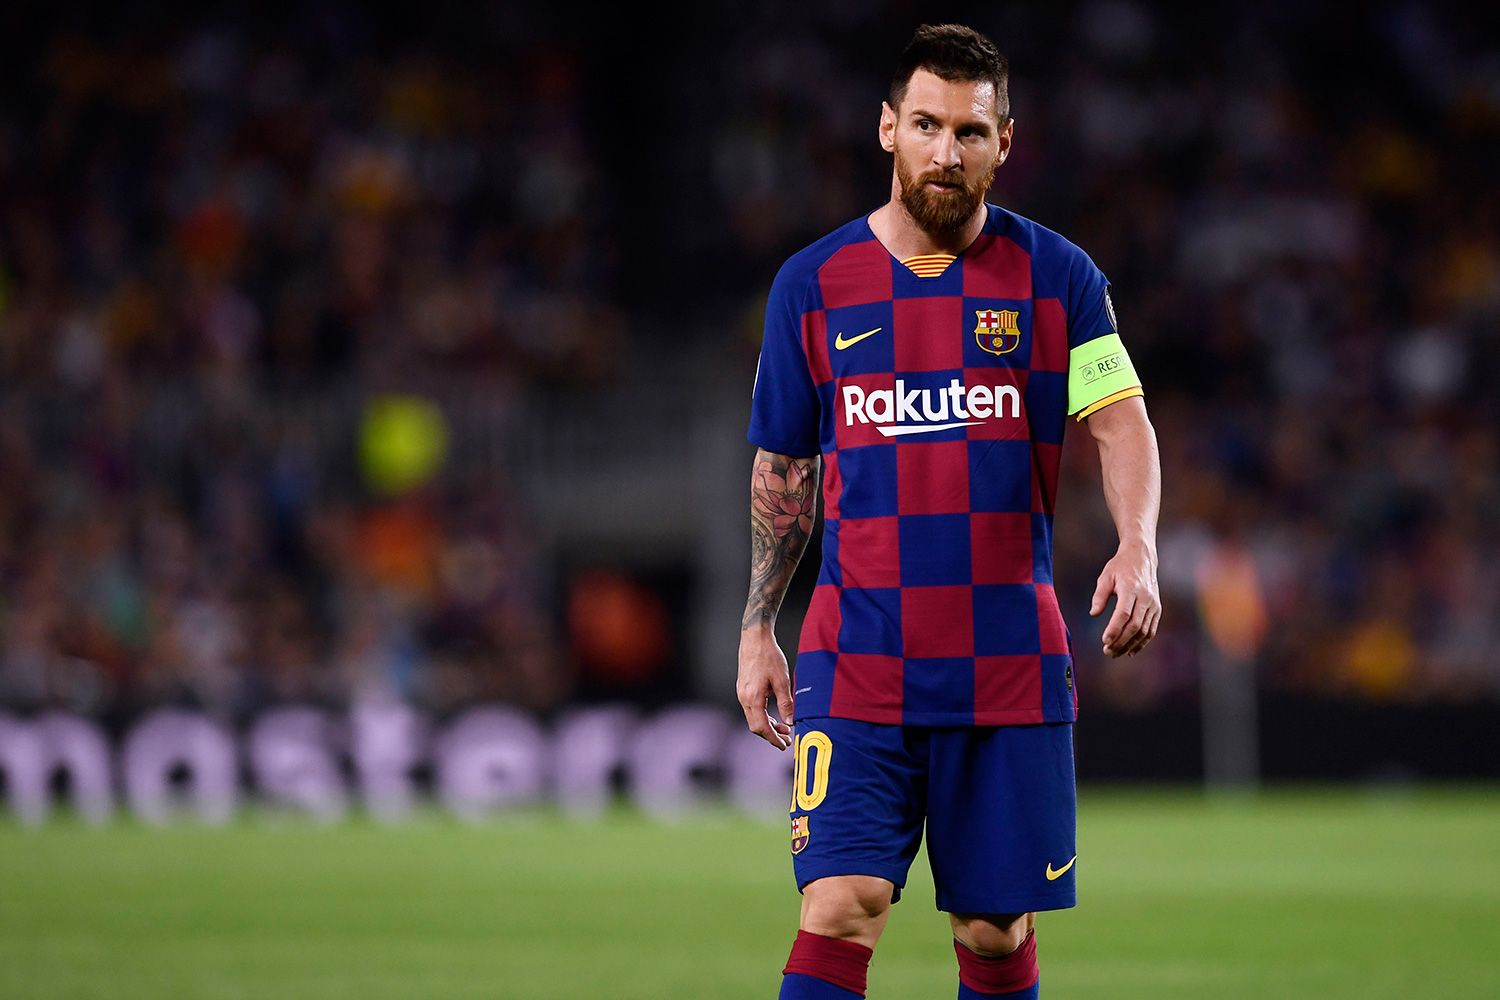 Messi went back to play against the Inter after his injury